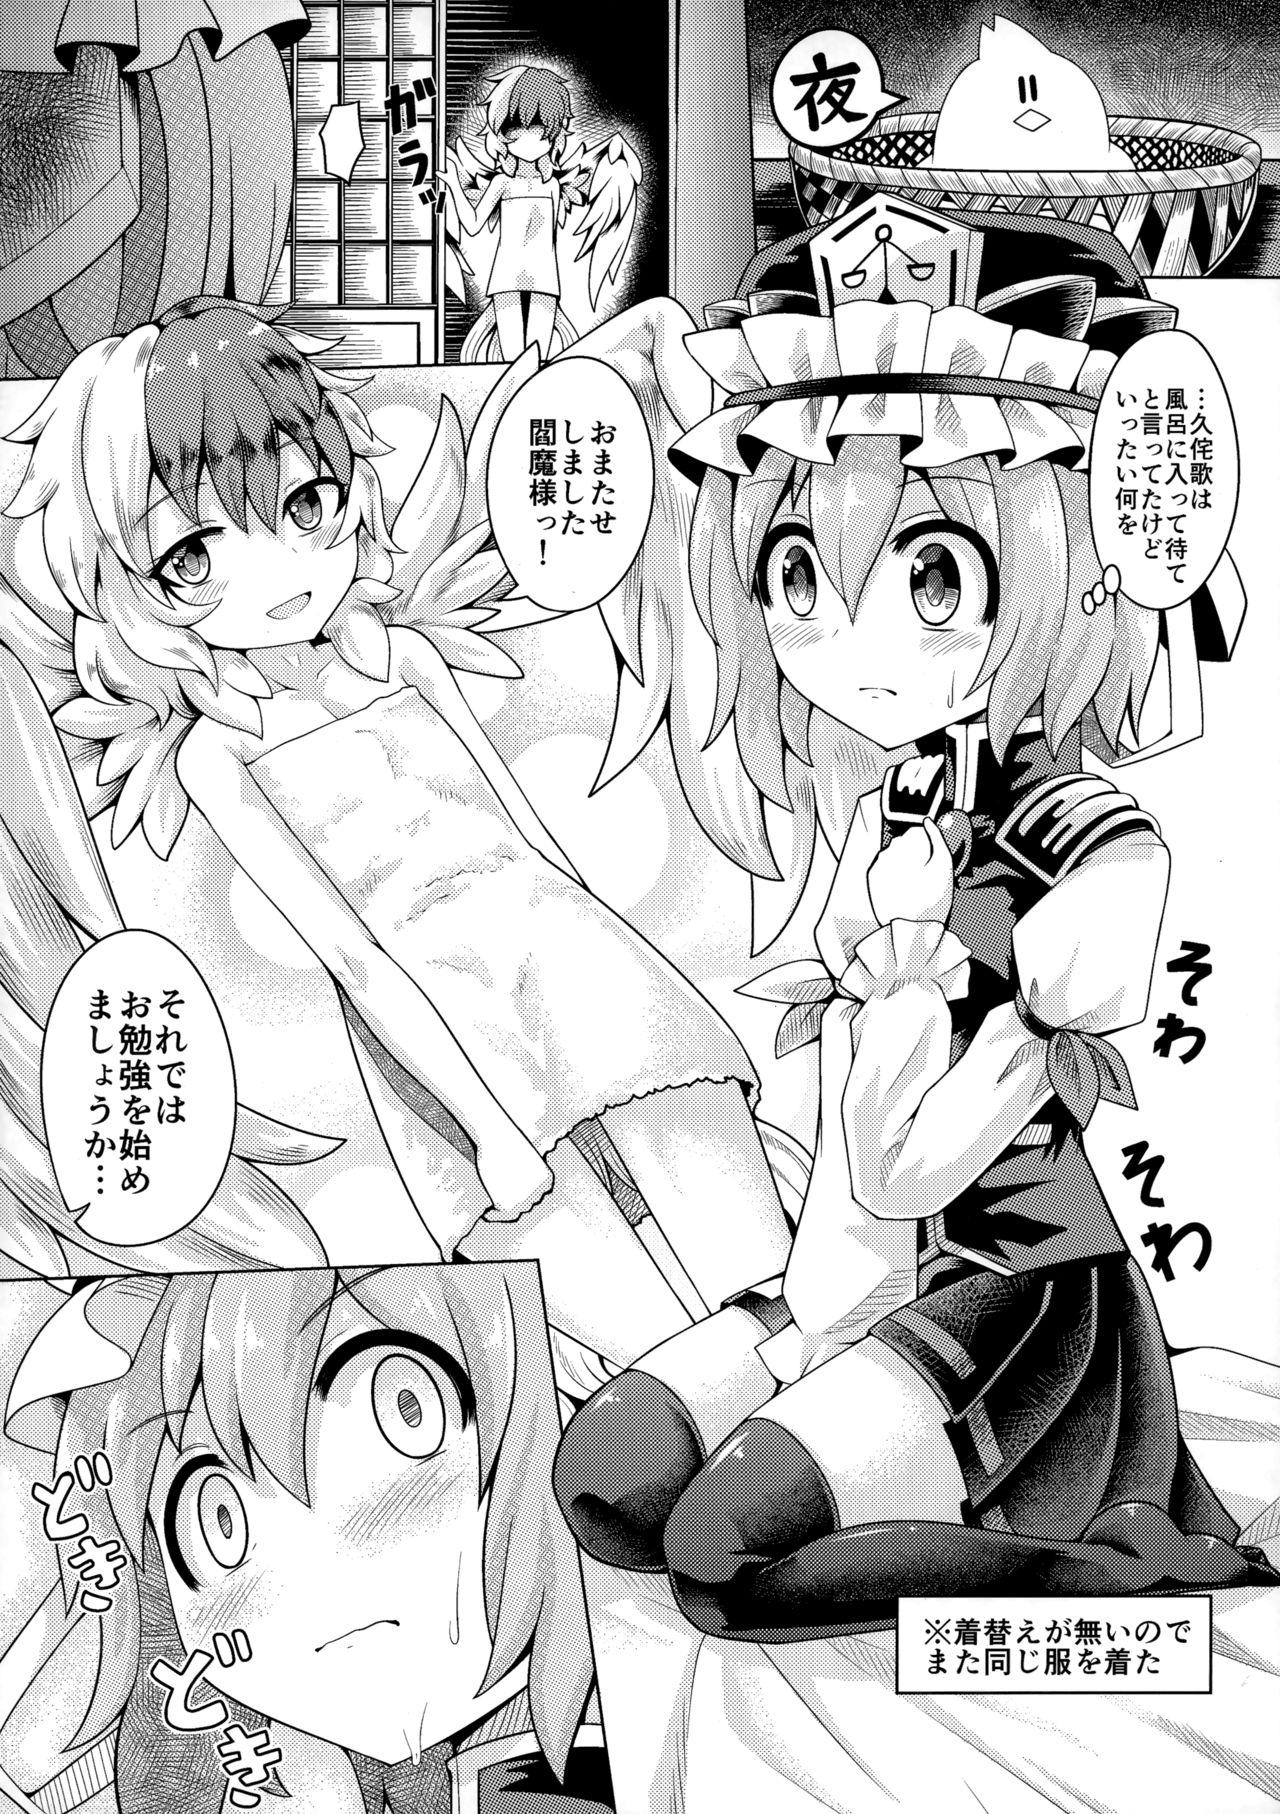 Tiny Reverse Sexuality 9 - Touhou project Blow Jobs Porn - Page 5